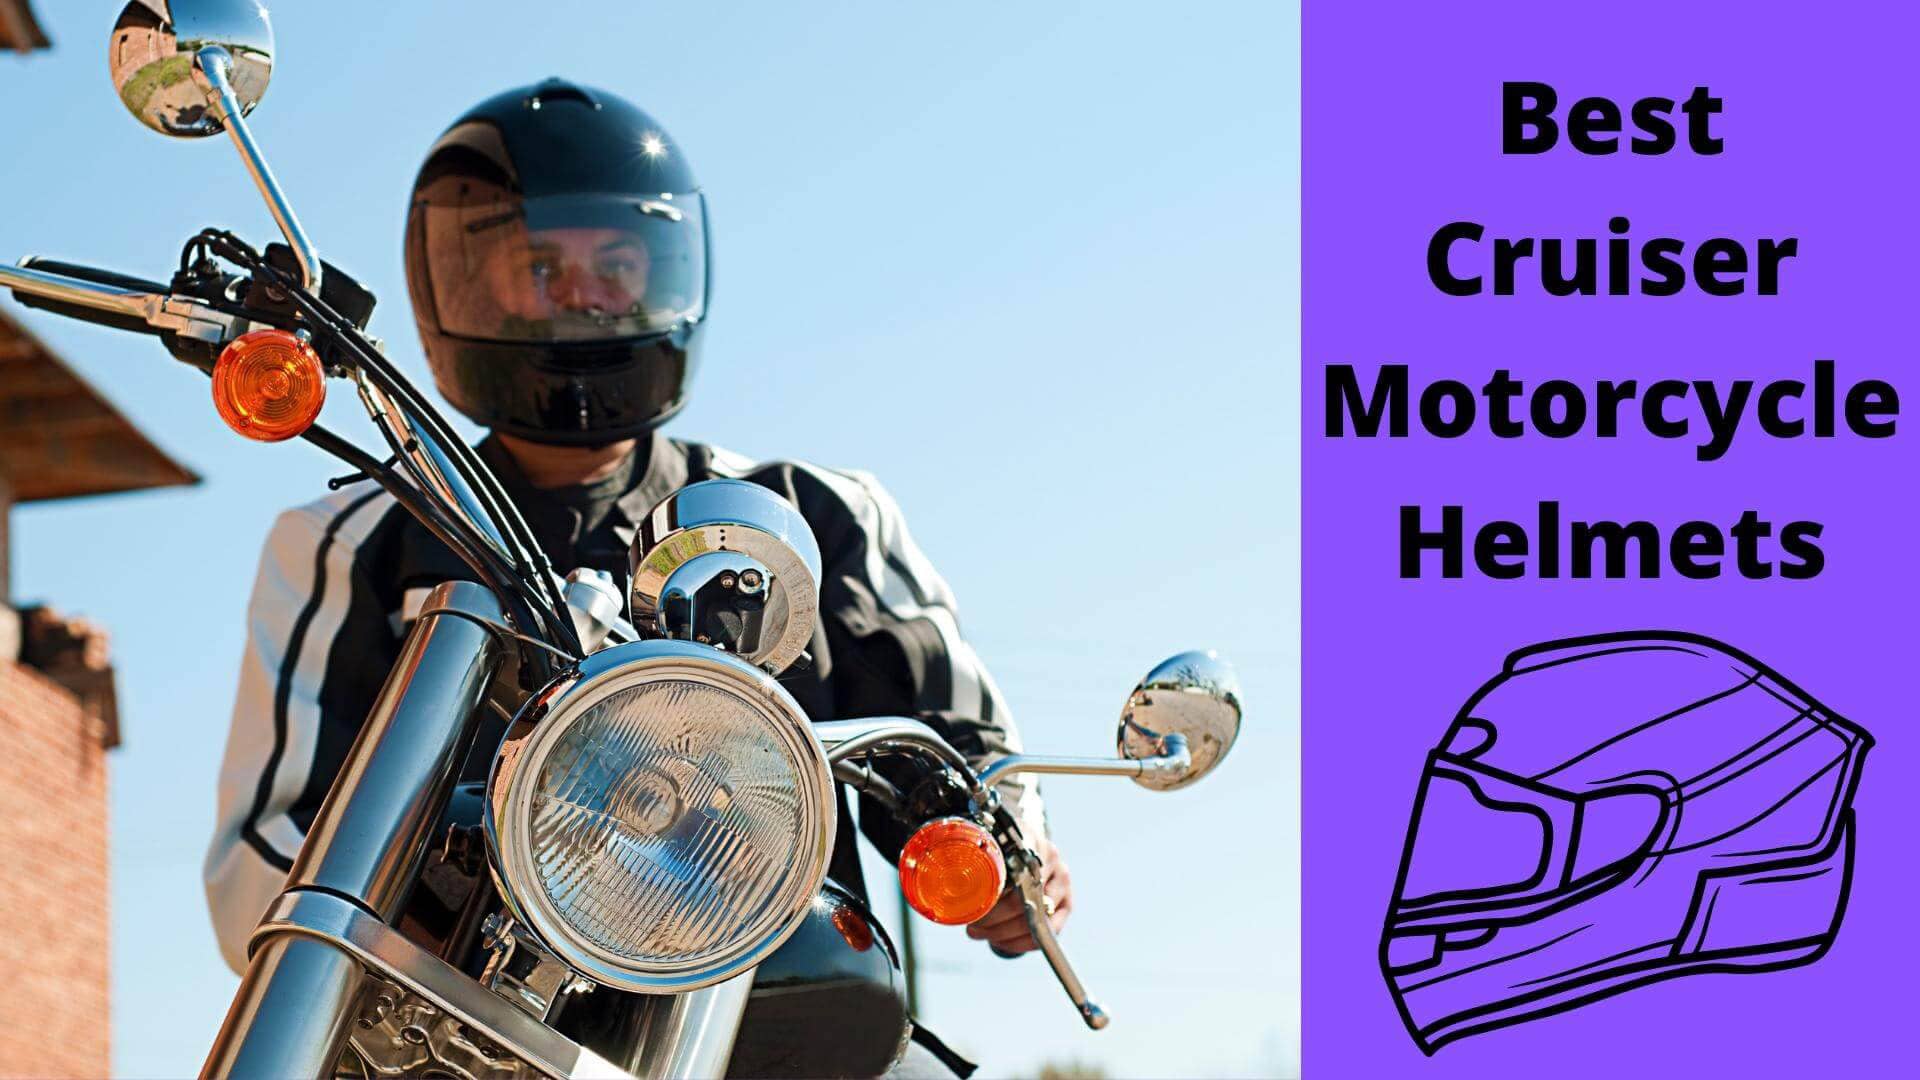 10 Best Cruiser Motorcycle Helmets For Safety And Style